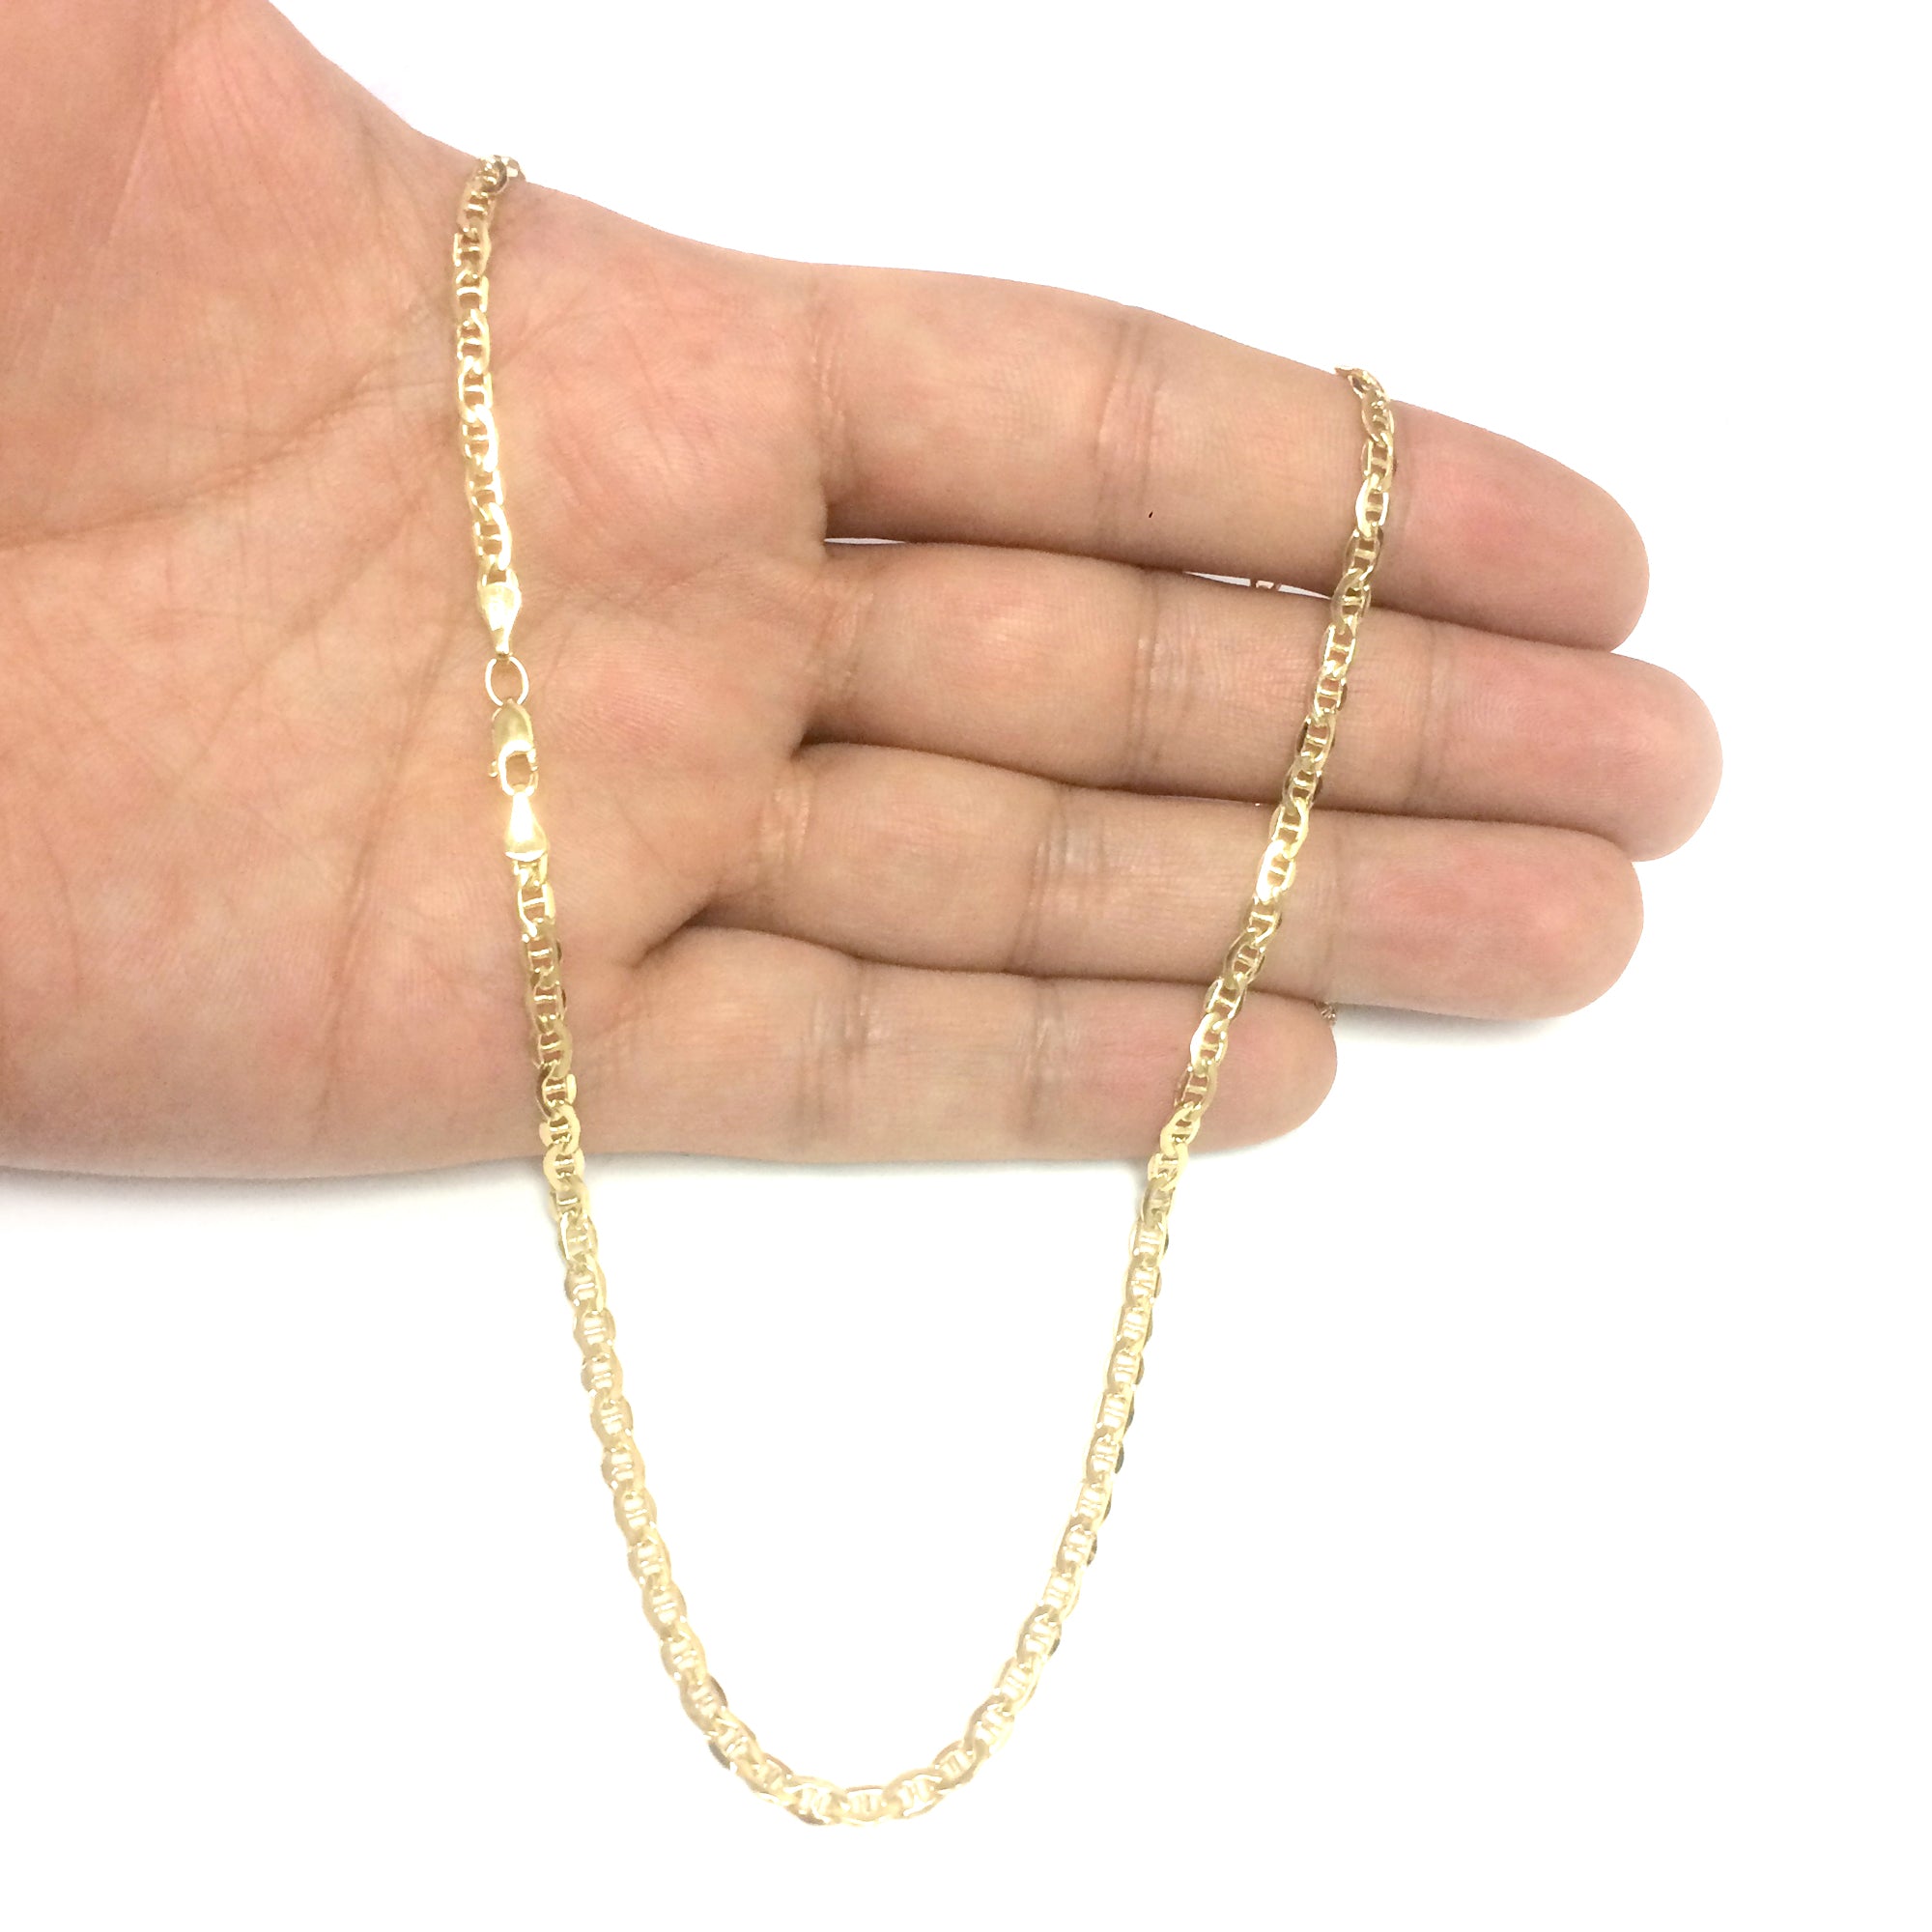 Stainless Steel Ball Chain Necklace - 3.2mm, 36